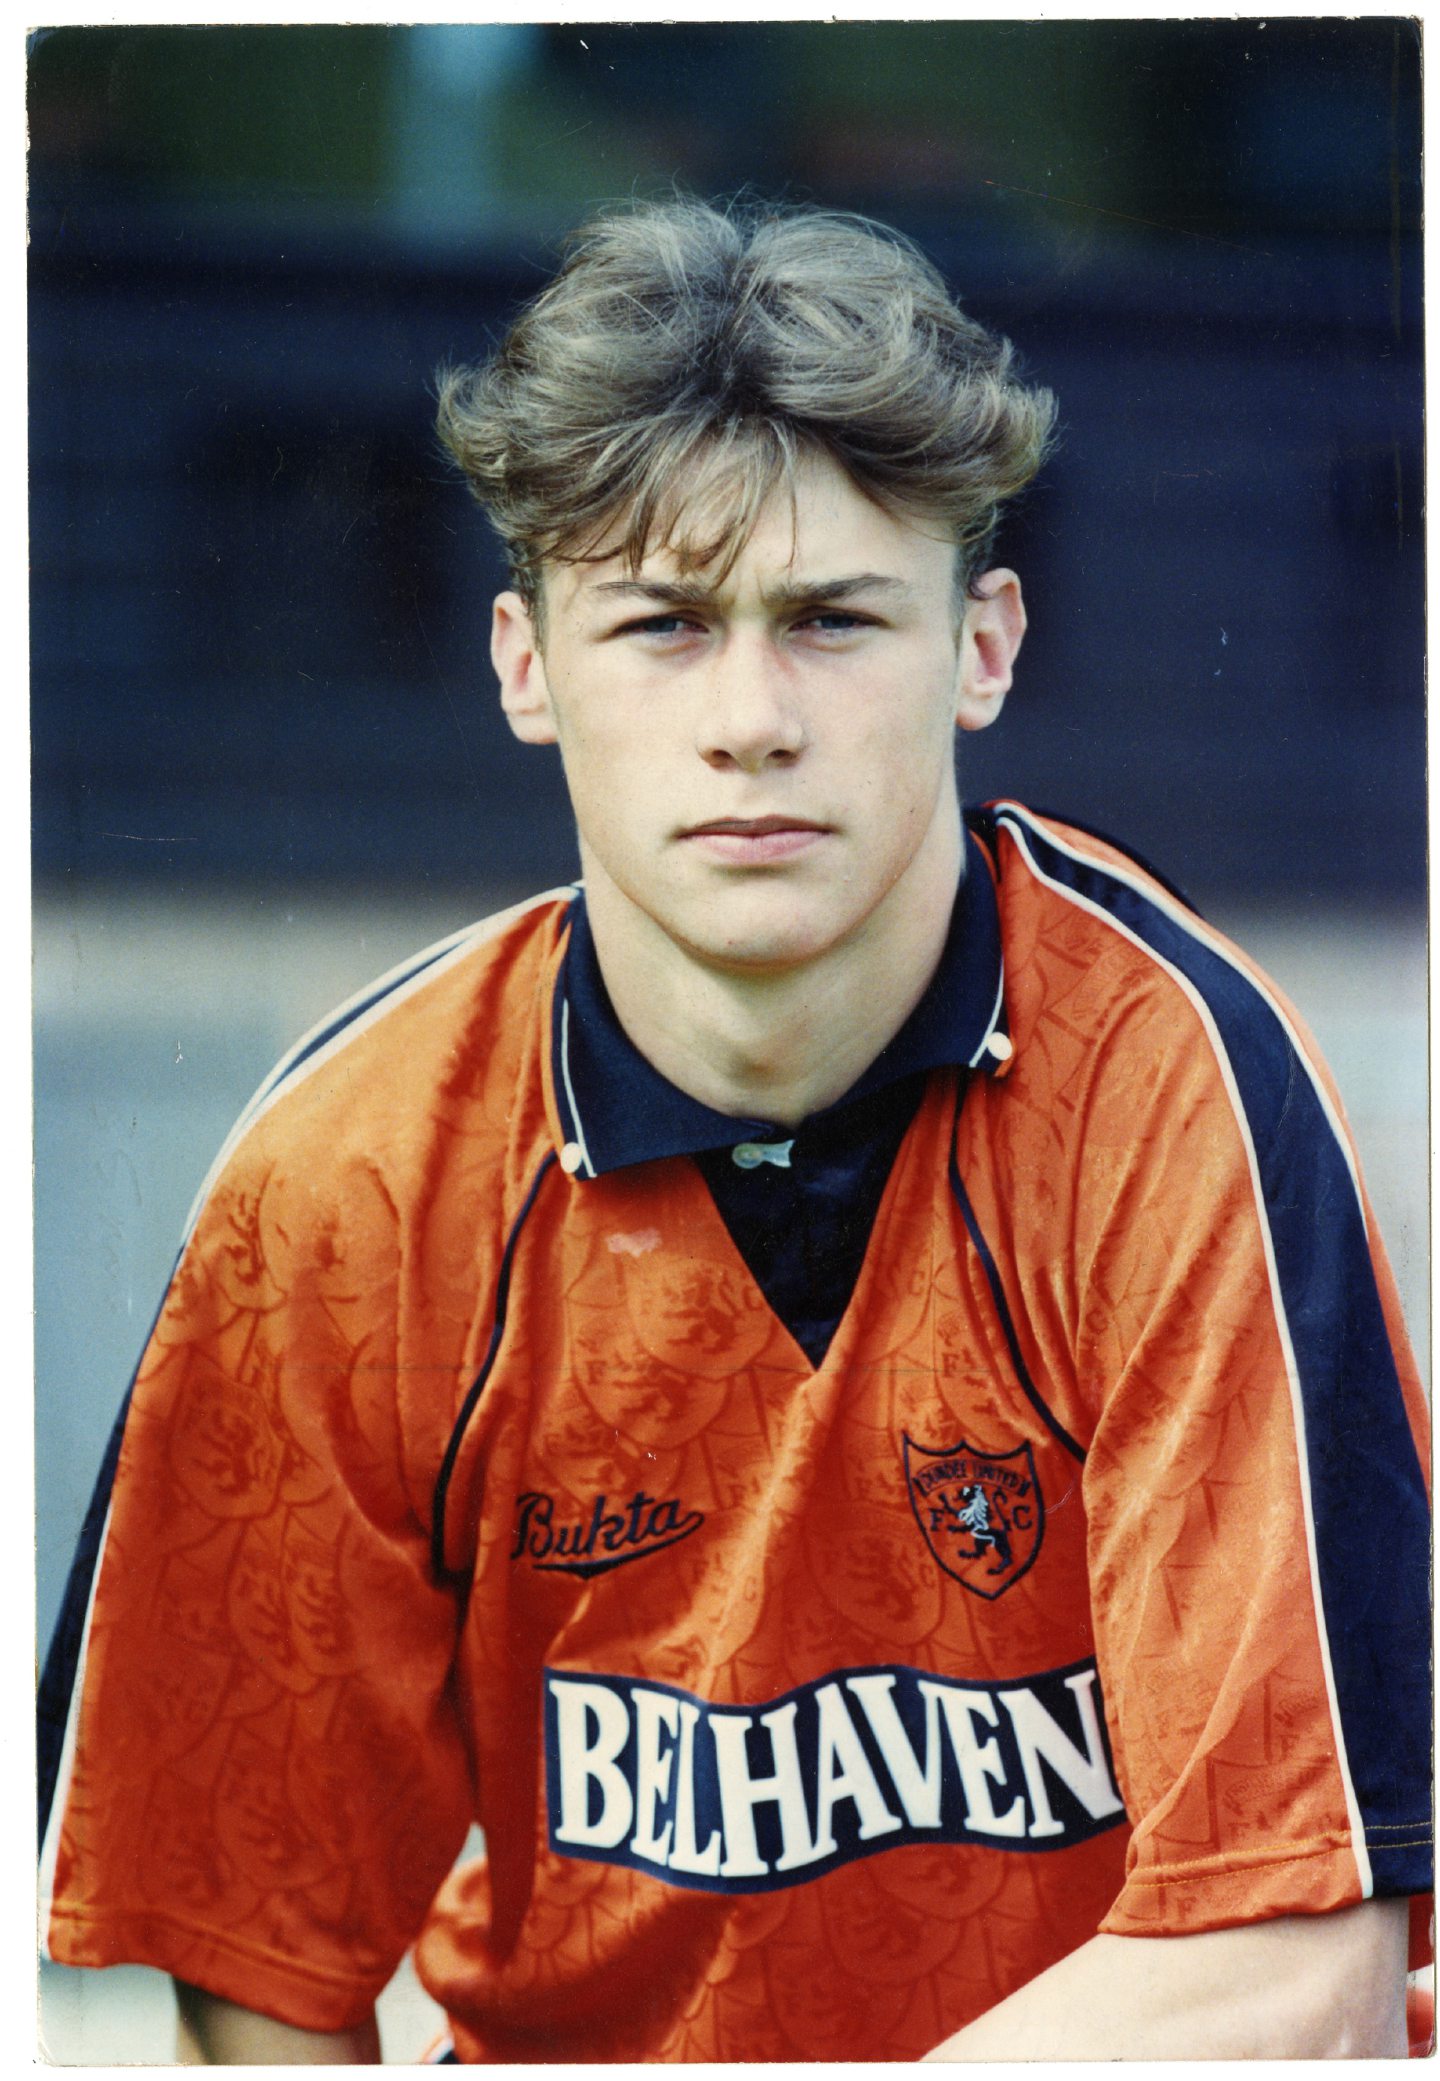 Duncan Ferguson pictured in August 1991 with Dundee United.